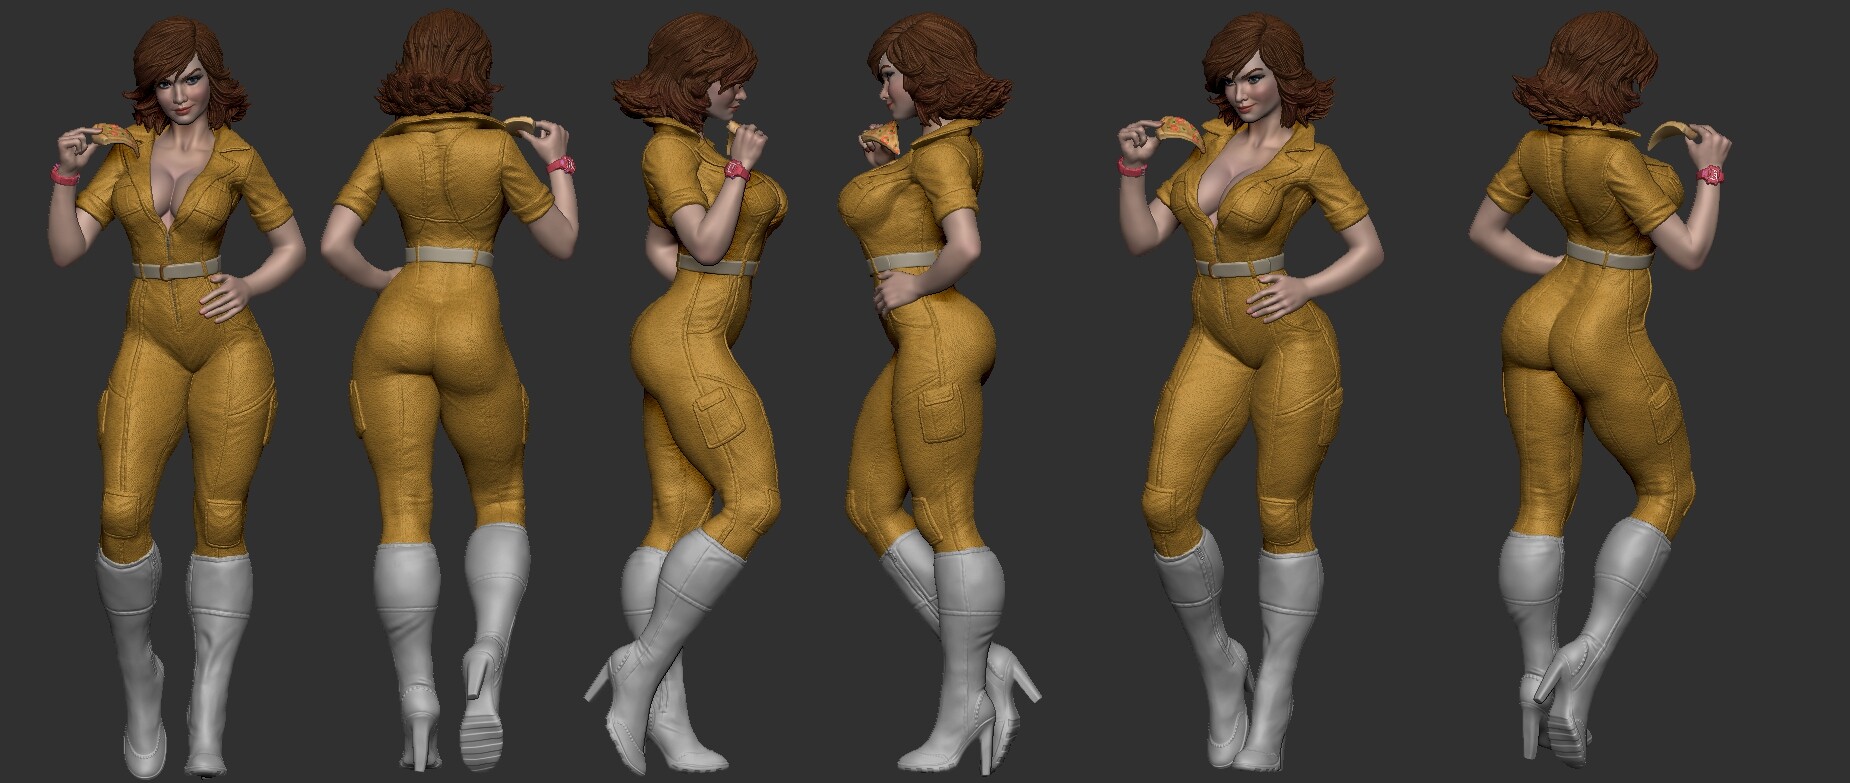 April O'Neil... since his wife is out